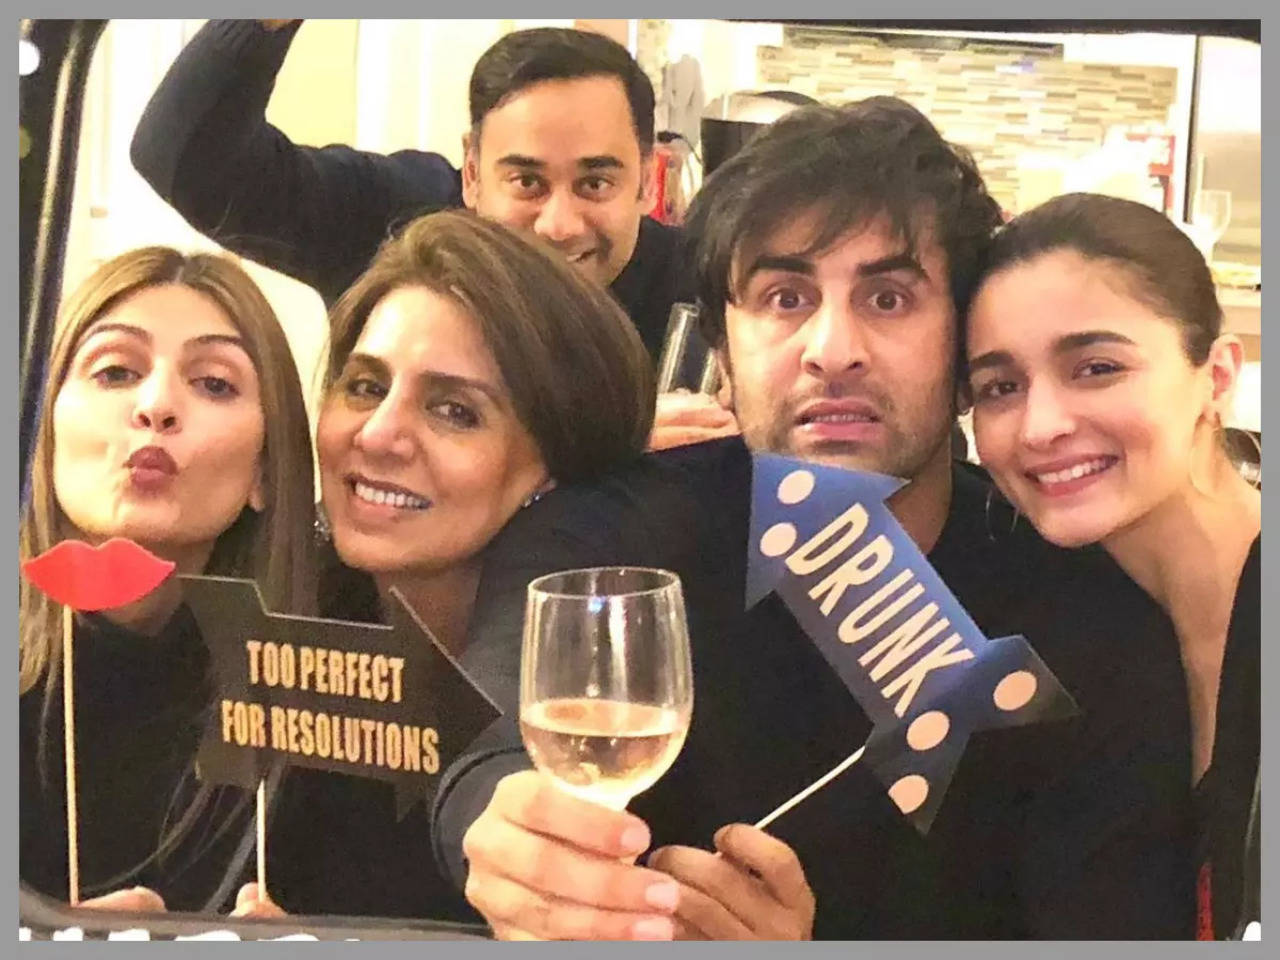 Ranbir Kapoor wishes his two loves 'Alia and Raha' a 'Happy Valentine's Day